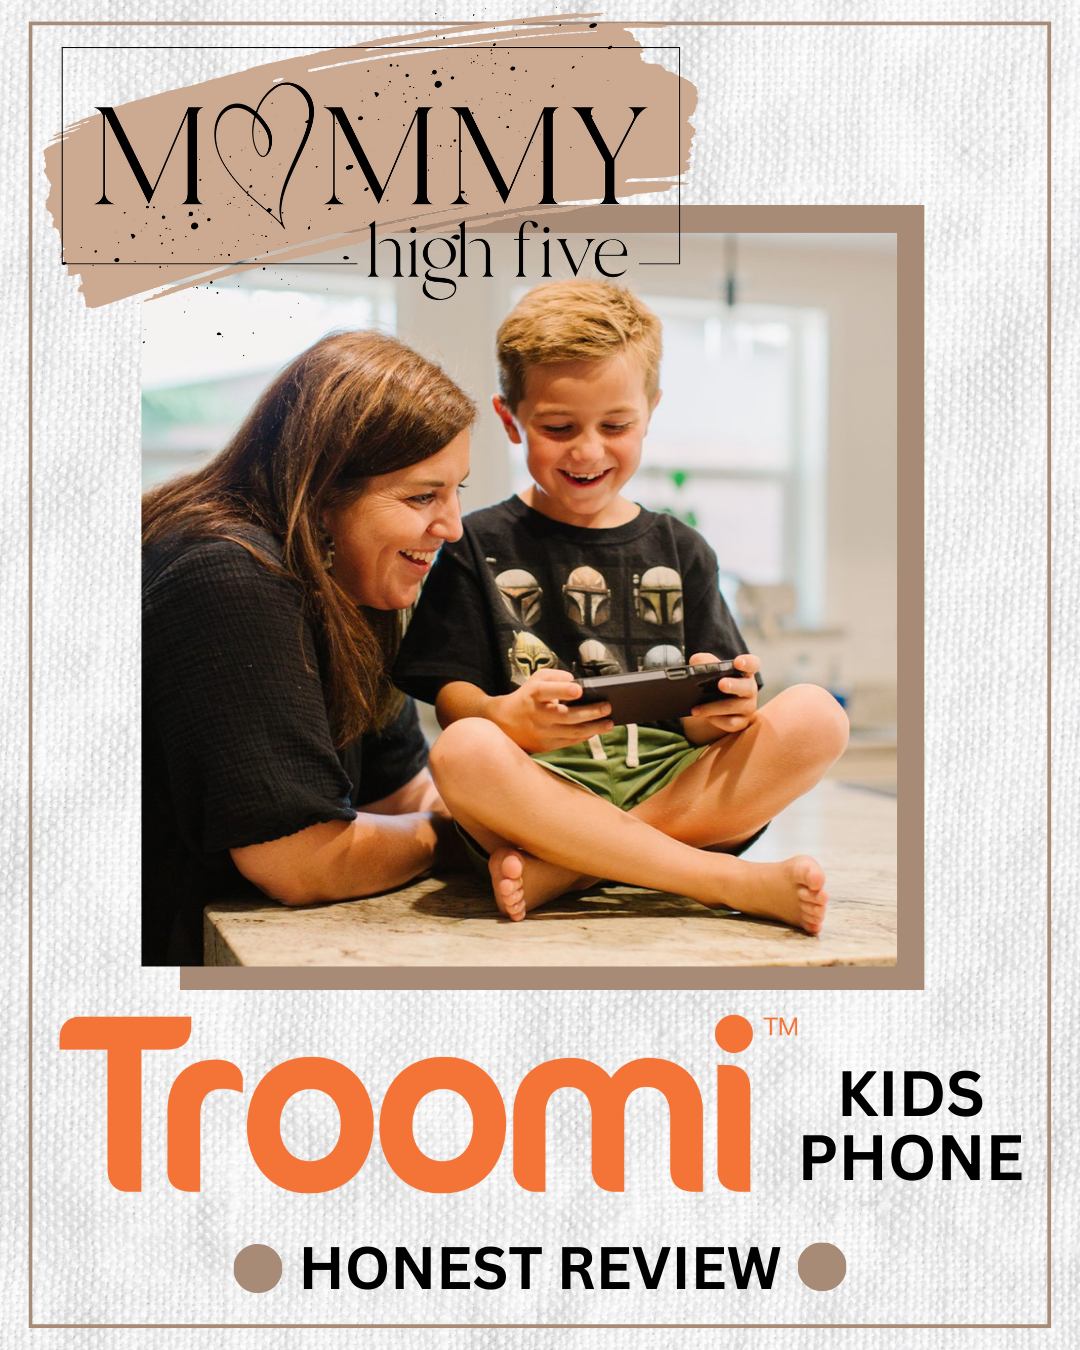 A heartwarming social media post featuring a mom and her son sitting on a kitchen counter, using the Troomi Smartphone. The caption, 'Troomi Smartphone Honest Review,' indicates Mommy High Five's commitment to providing honest and insightful product reviews. Rawlings Media showcases their ability to capture authentic moments and convey the value of products through engaging visuals. This post invites parents to learn more about the Troomi Smartphone and make informed decisions for their families.